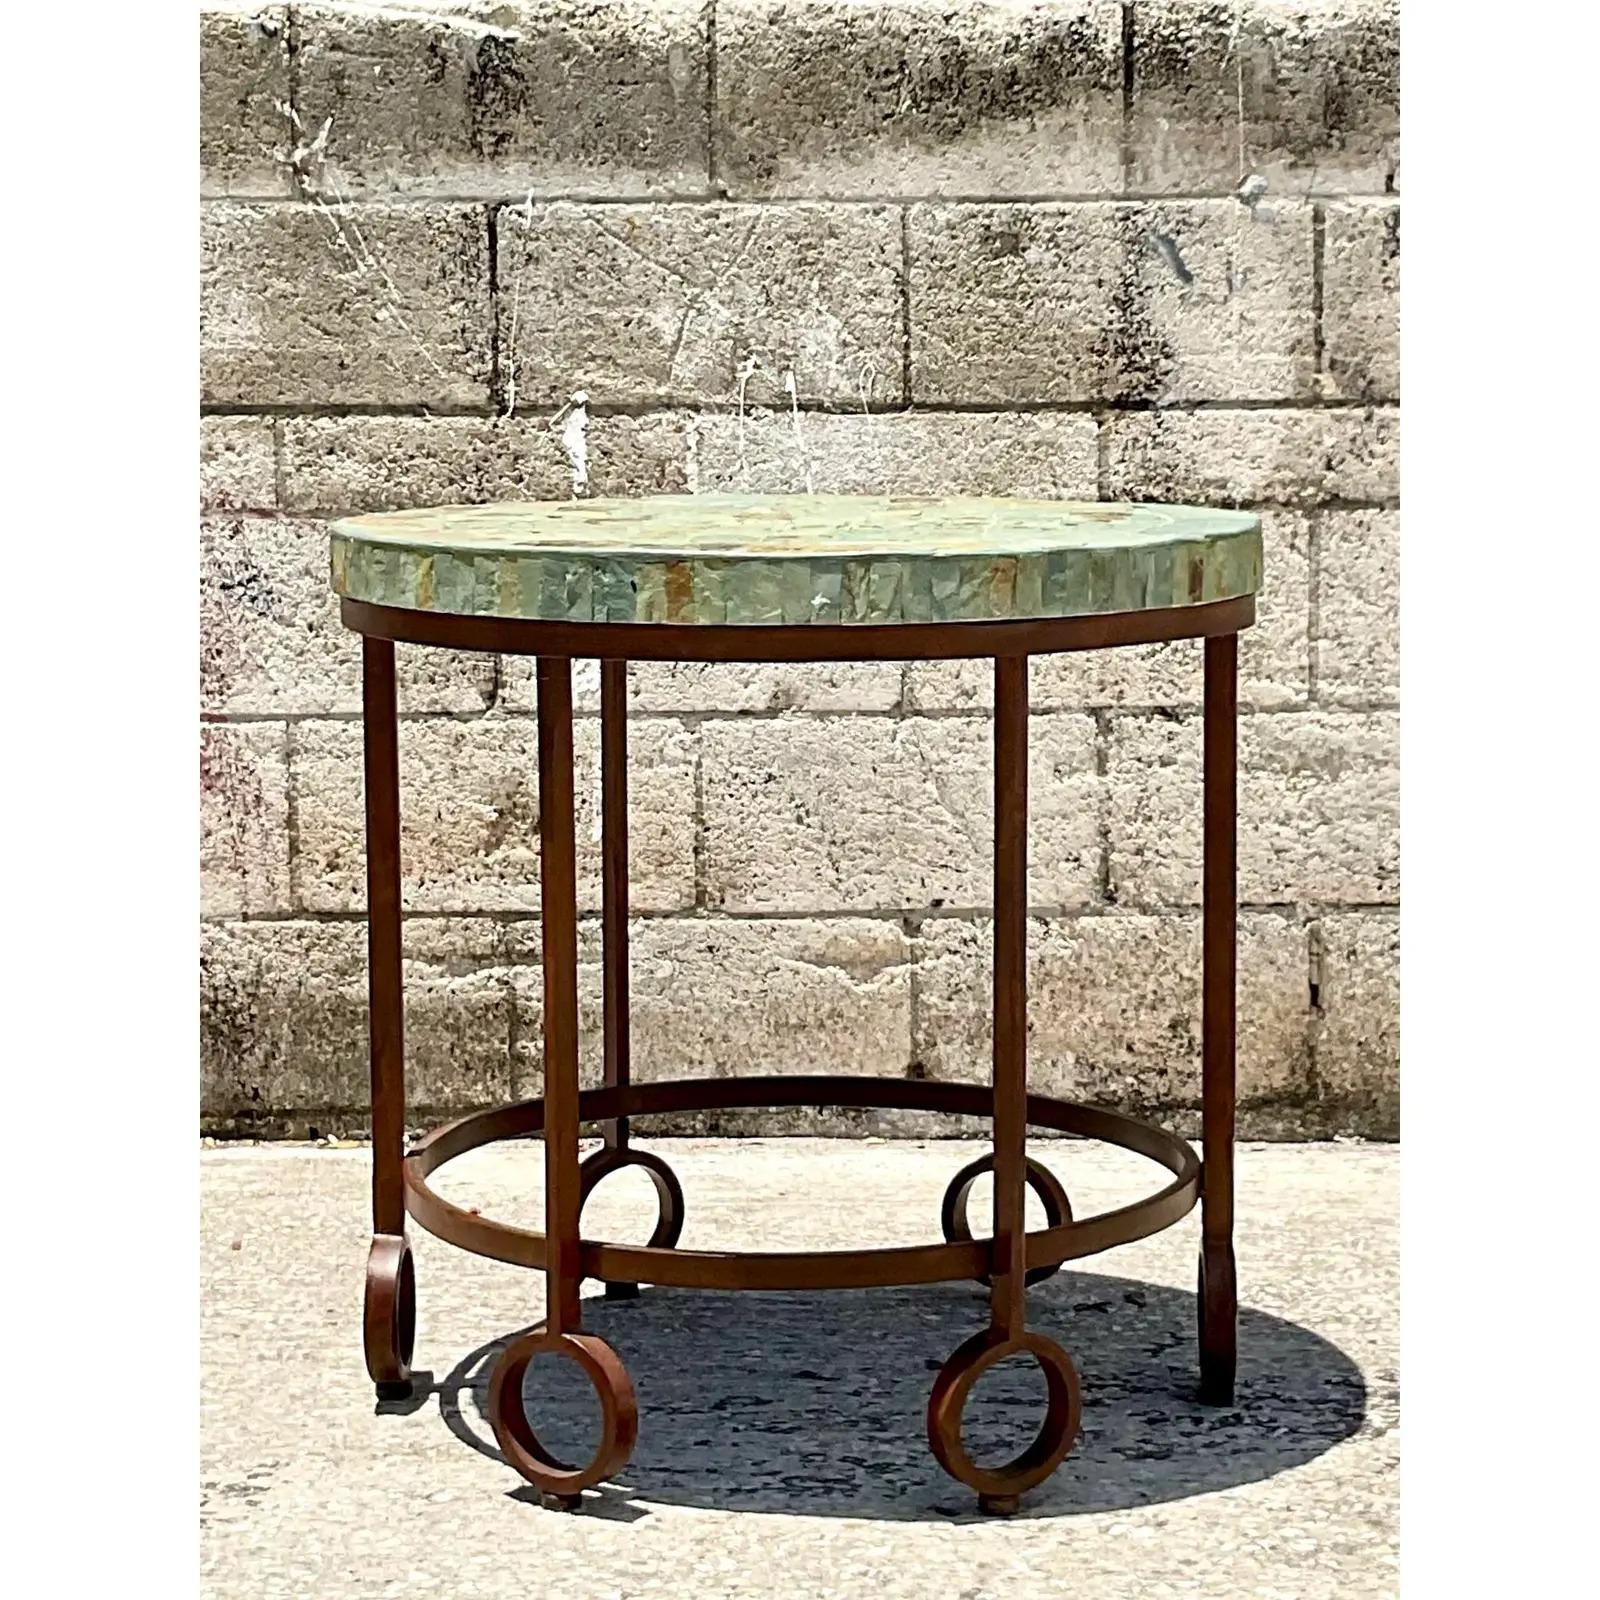 Fantastic vintage boho side table. Incredible distressed rusty frame in a circle design. Small tile slate top in the most beautiful green color. Acquired from a Palm Beach estate.